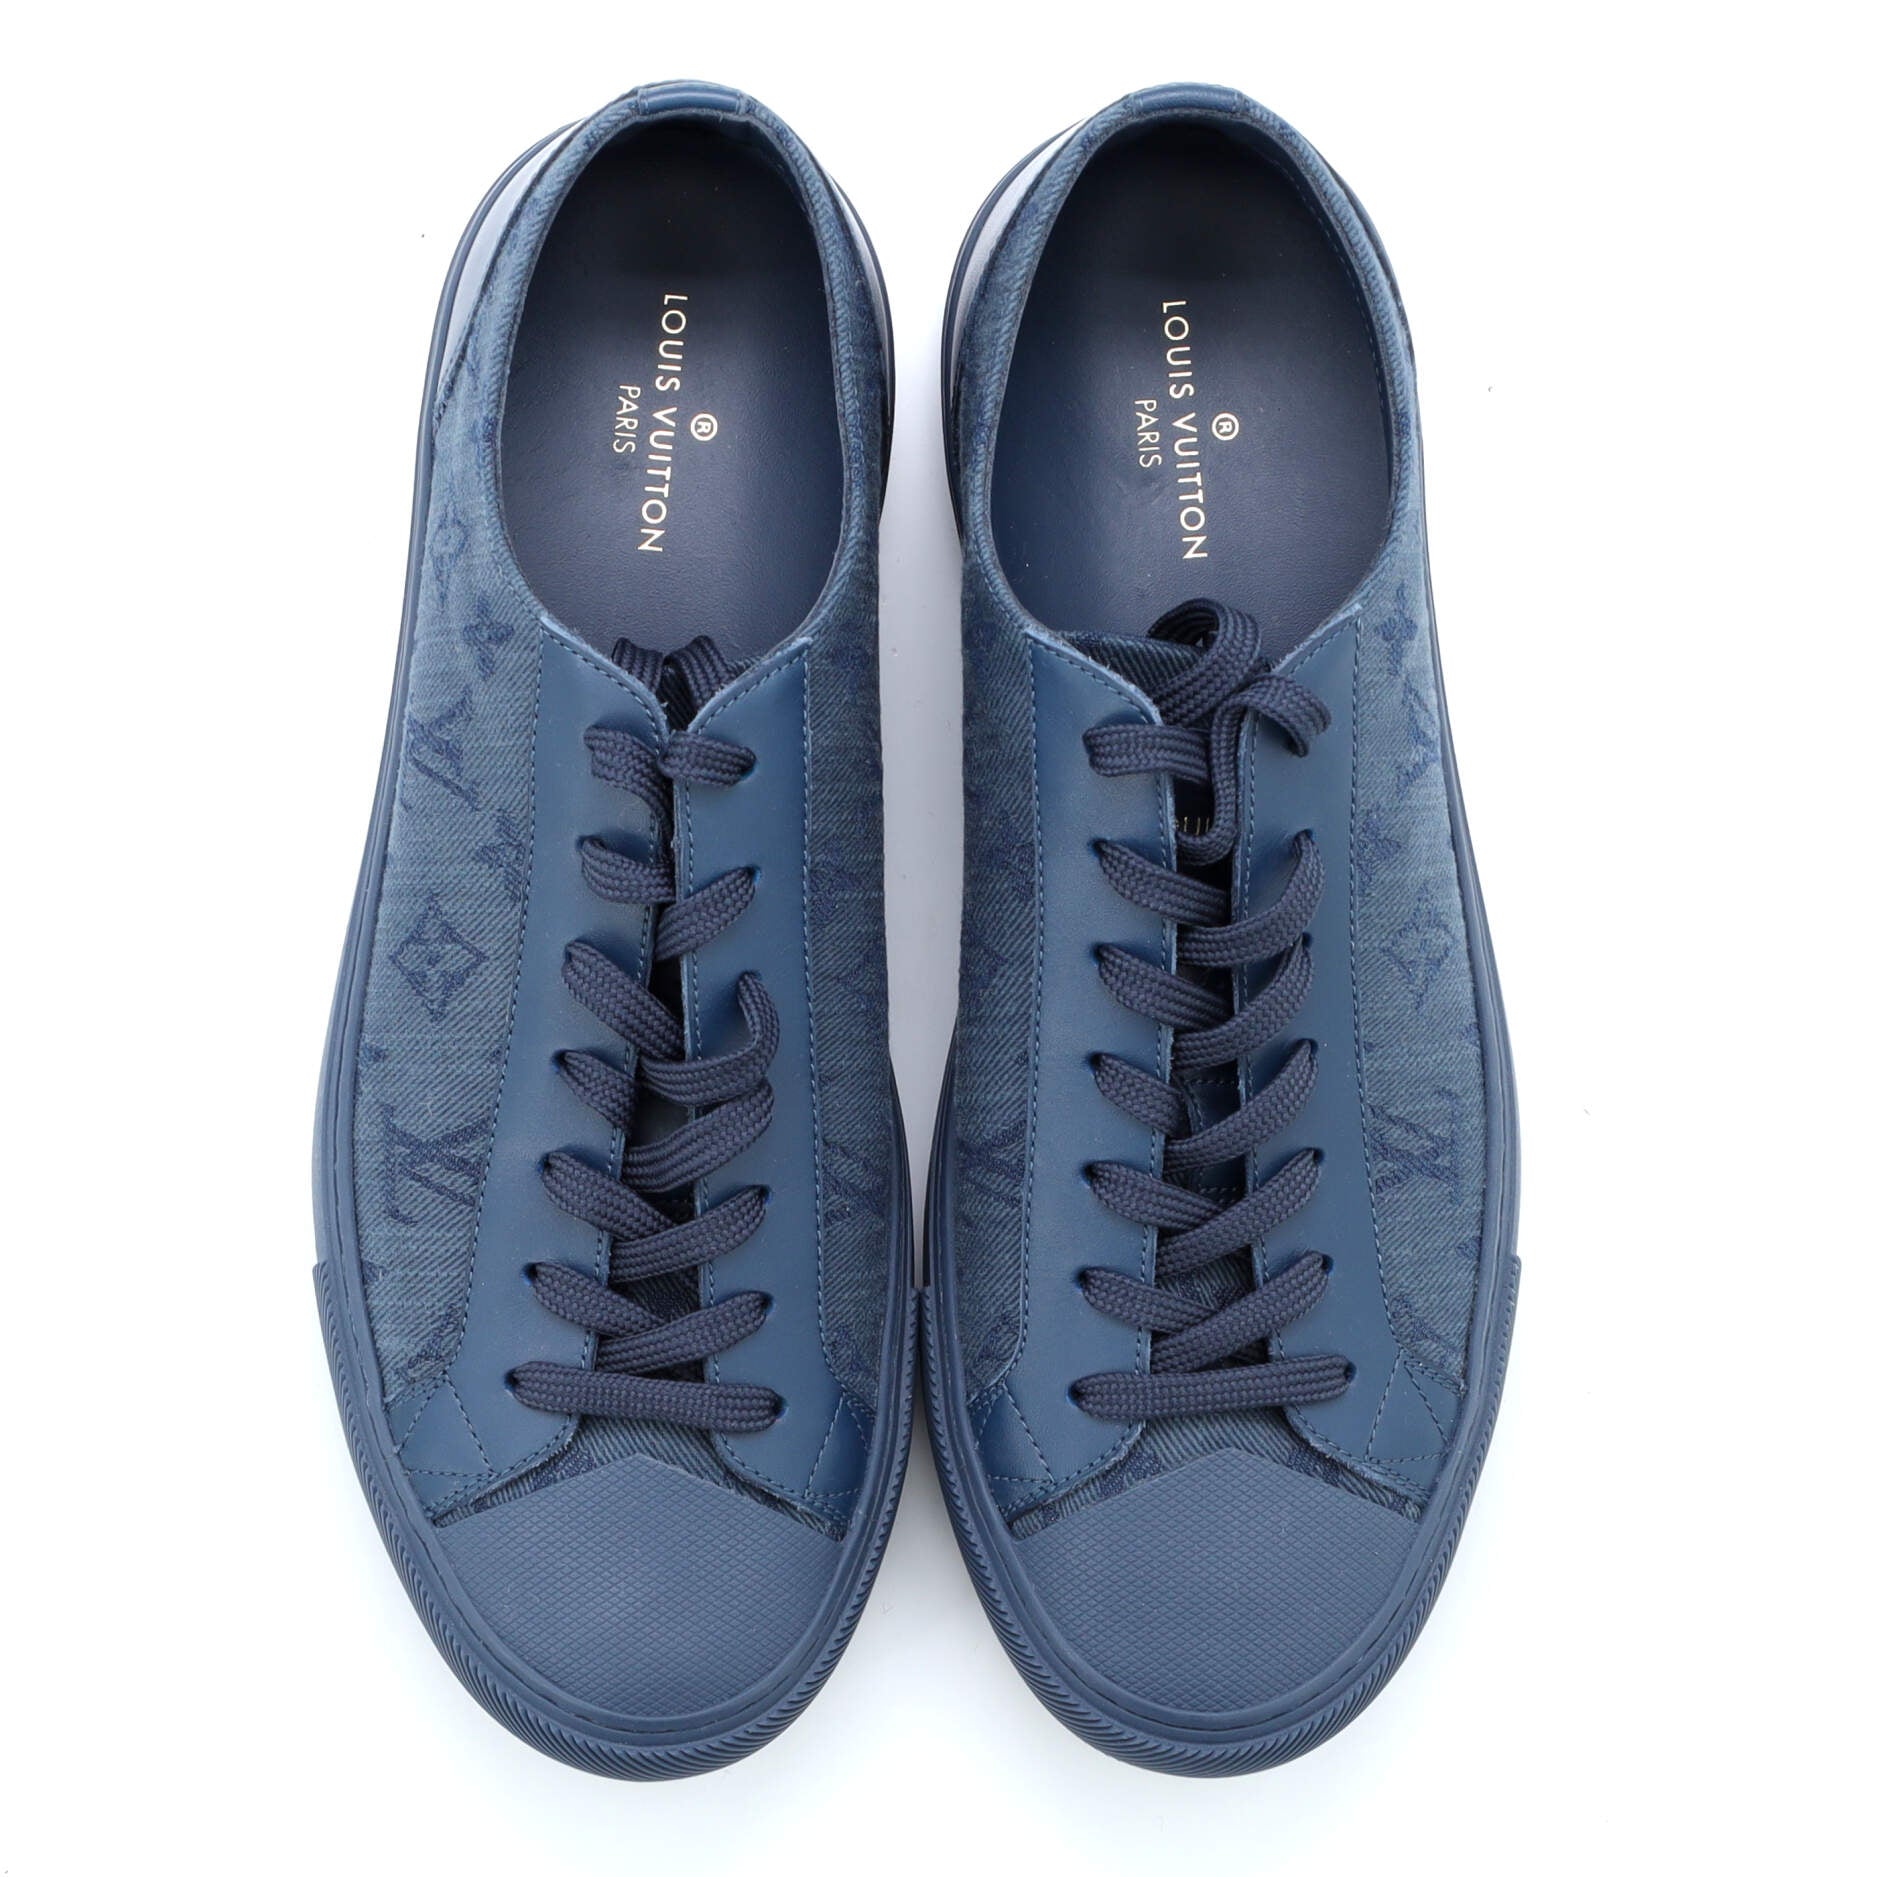 LOUIS VUITTON Navy Blue Leather Tattoo LV Logo Monogram High Top Sneakers